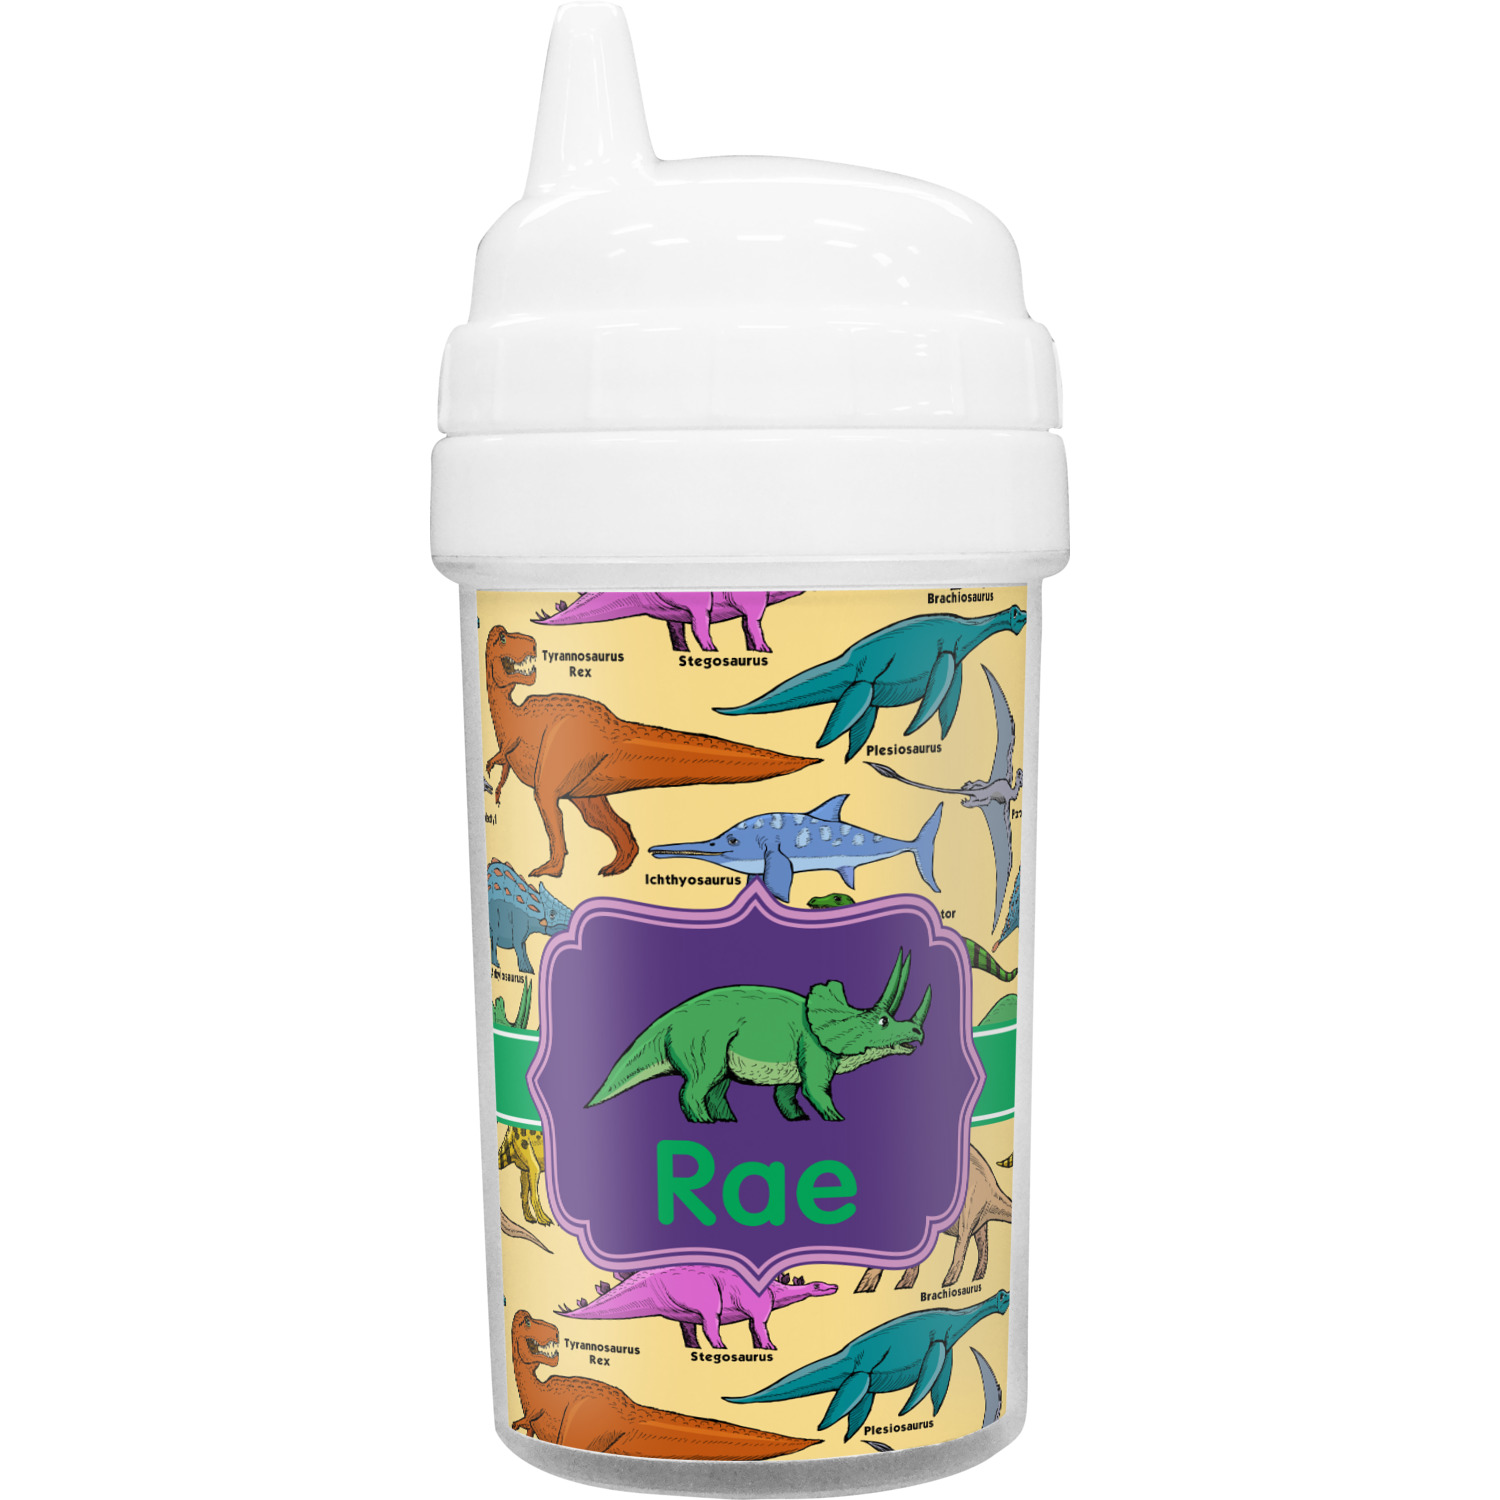 Customized Sippy Cups for Boys - 4 Designs